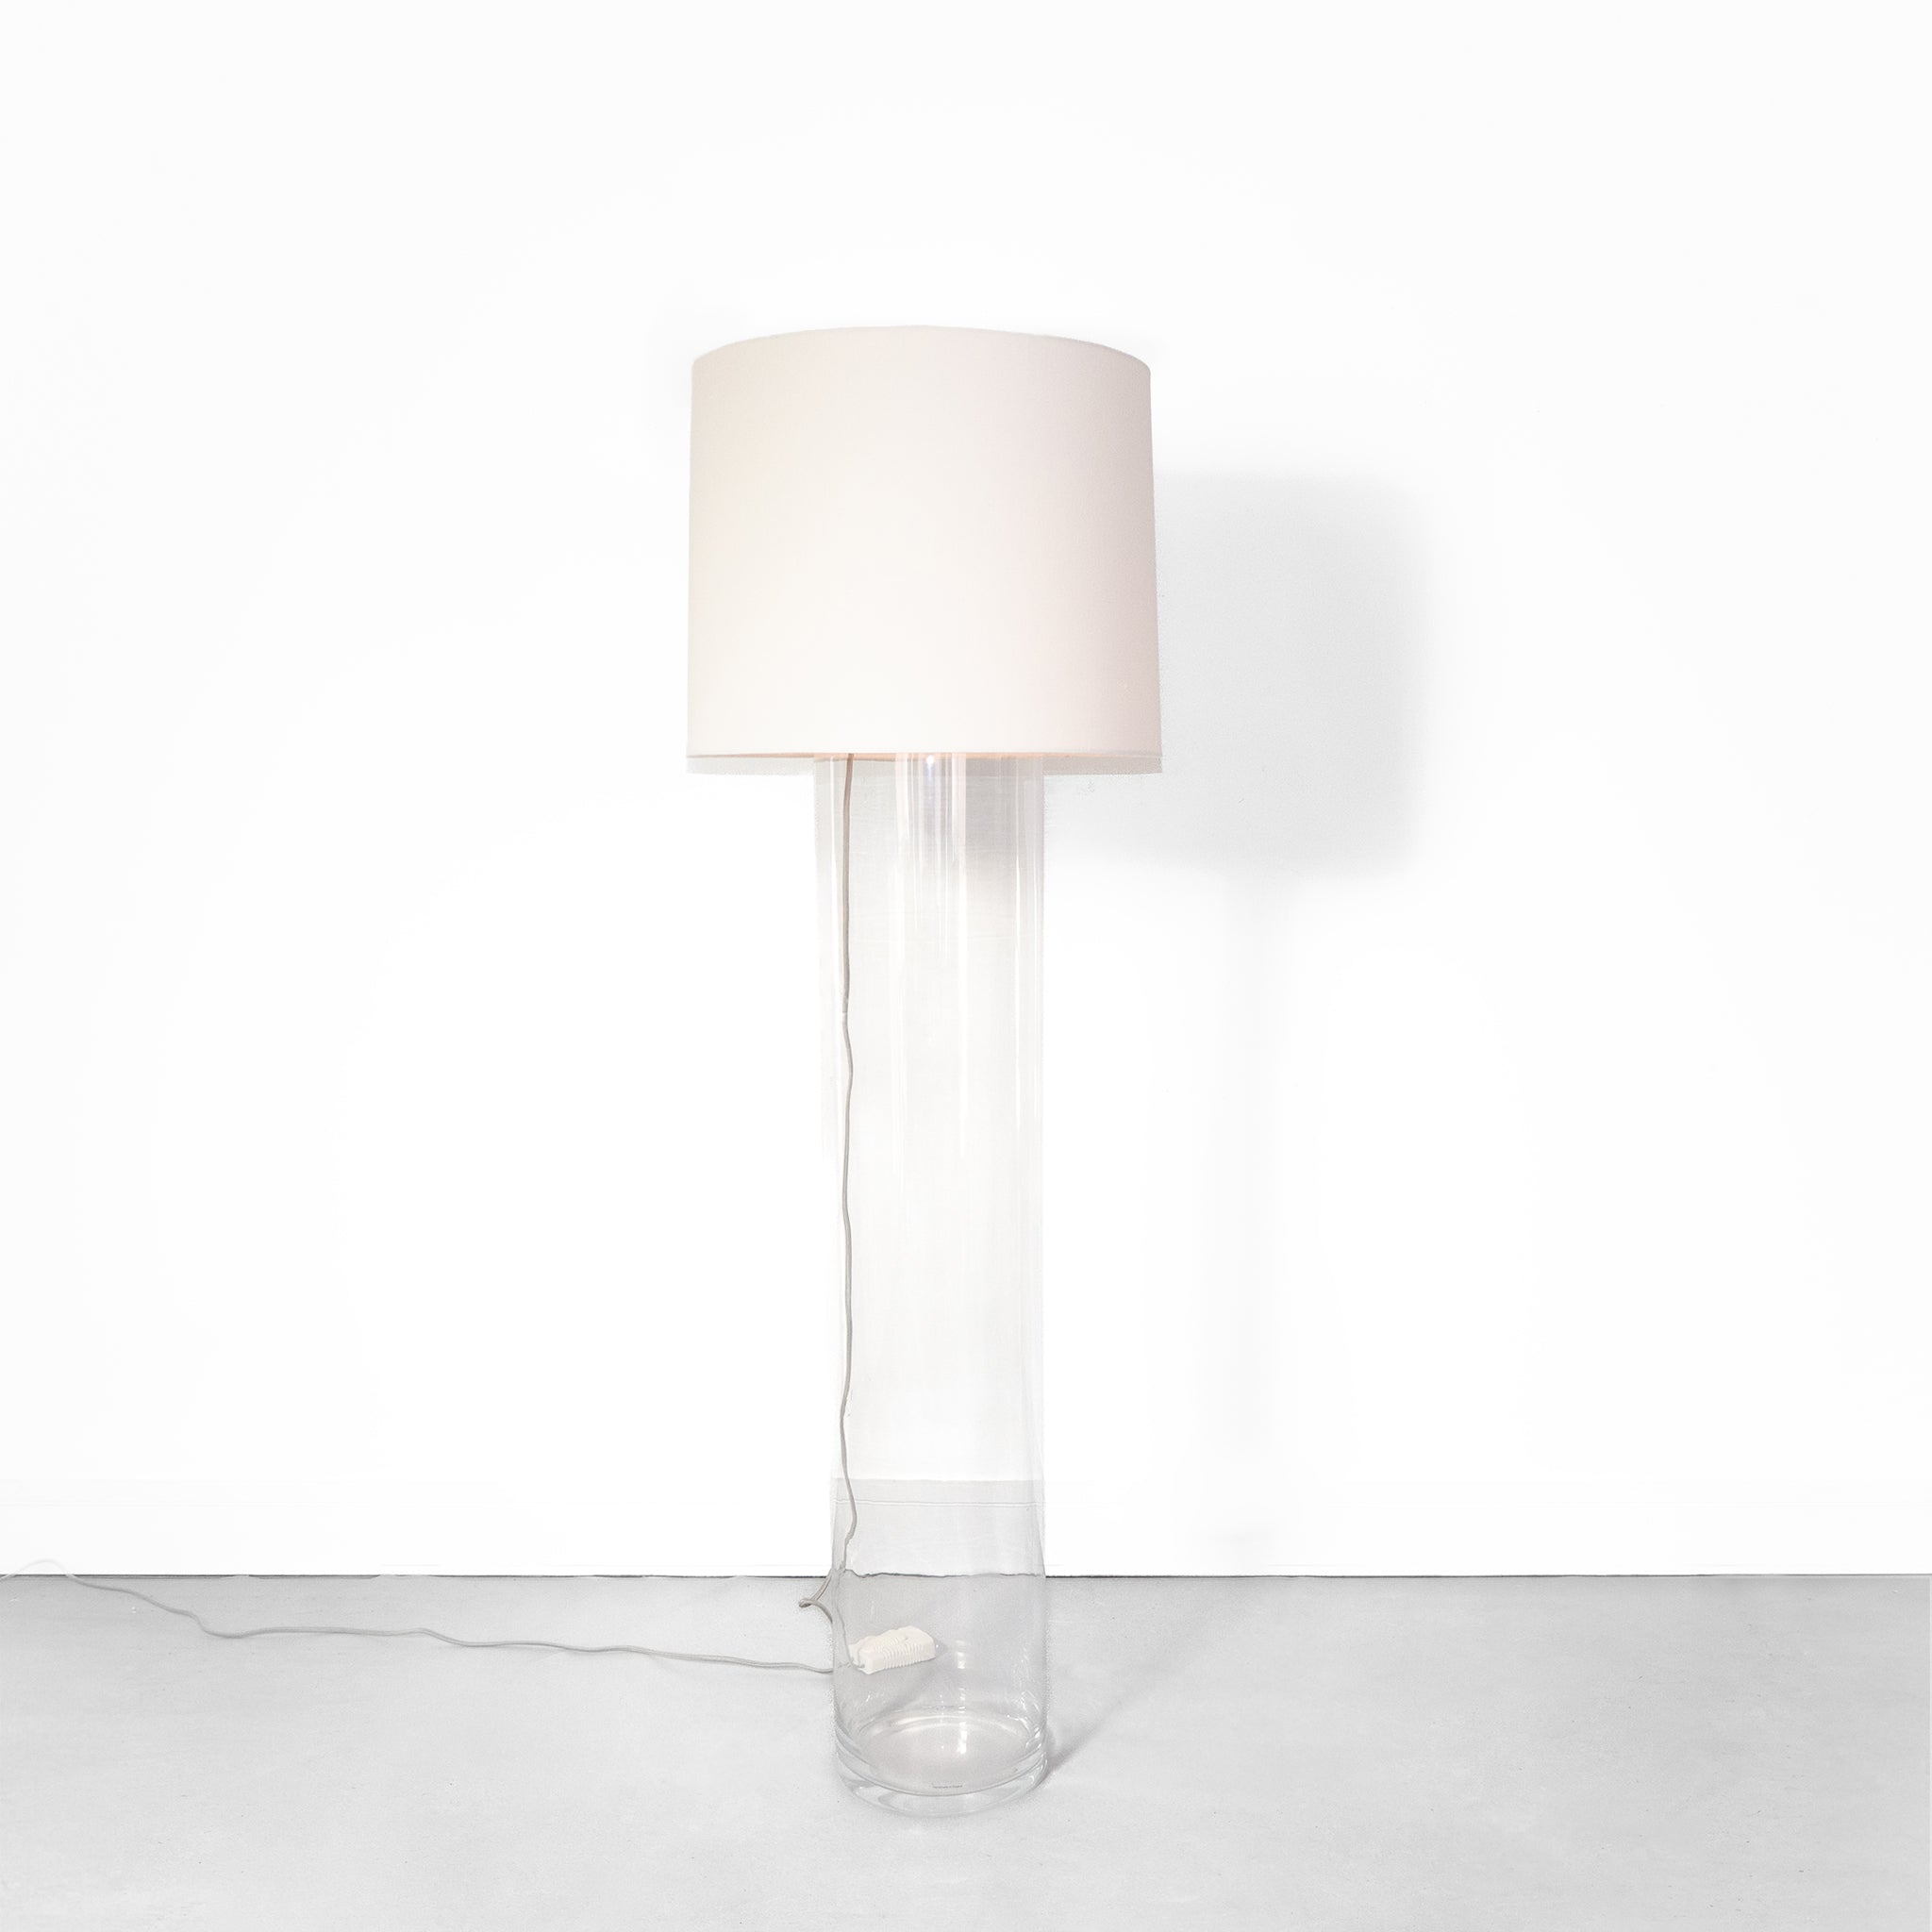 Arterios Invisible Glass Cylinder Floor Lamp